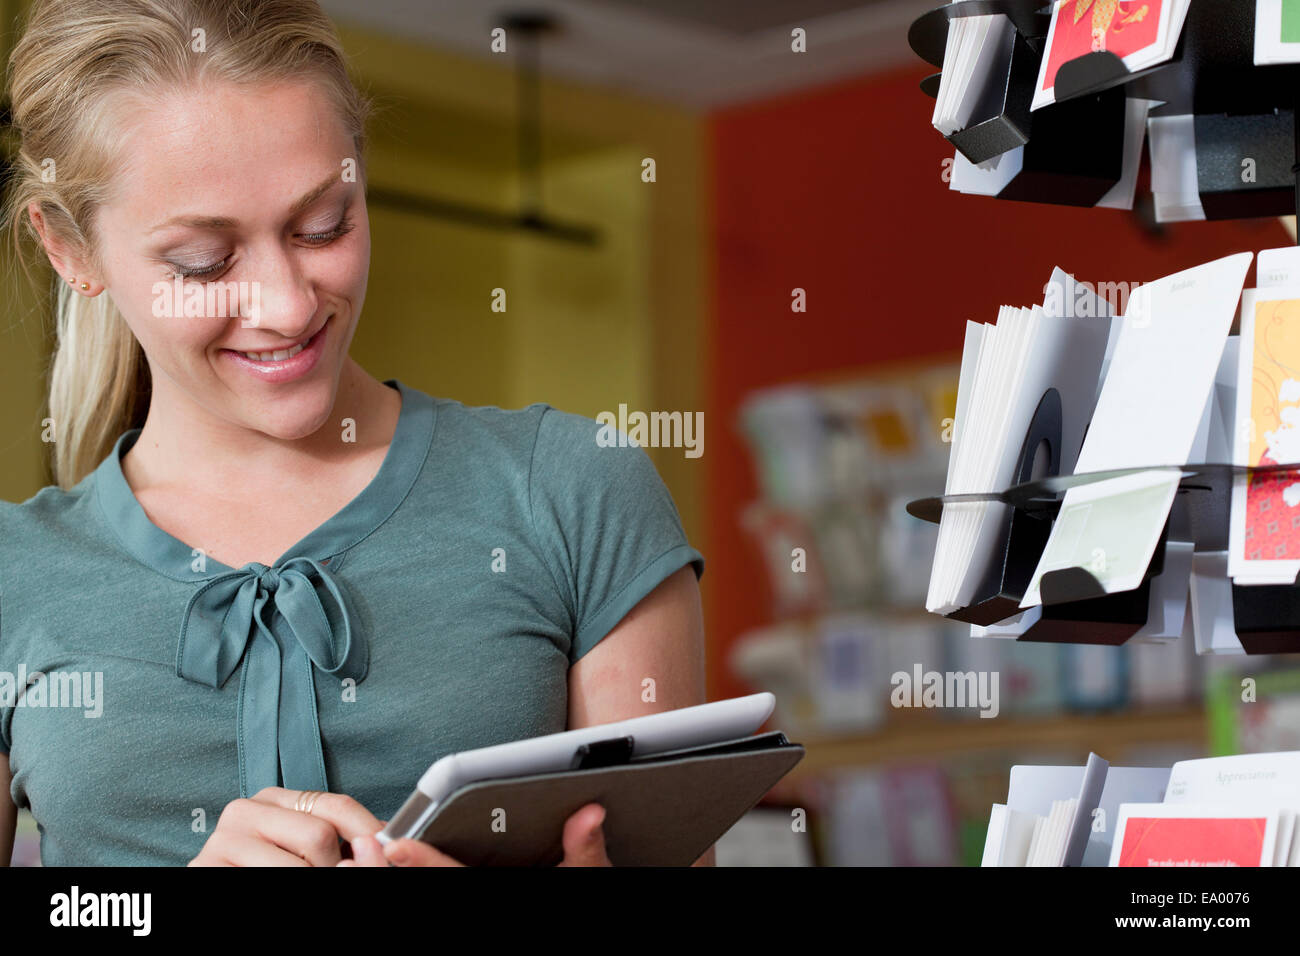 Female sales assistant using digital tablet in stationery shop Stock Photo